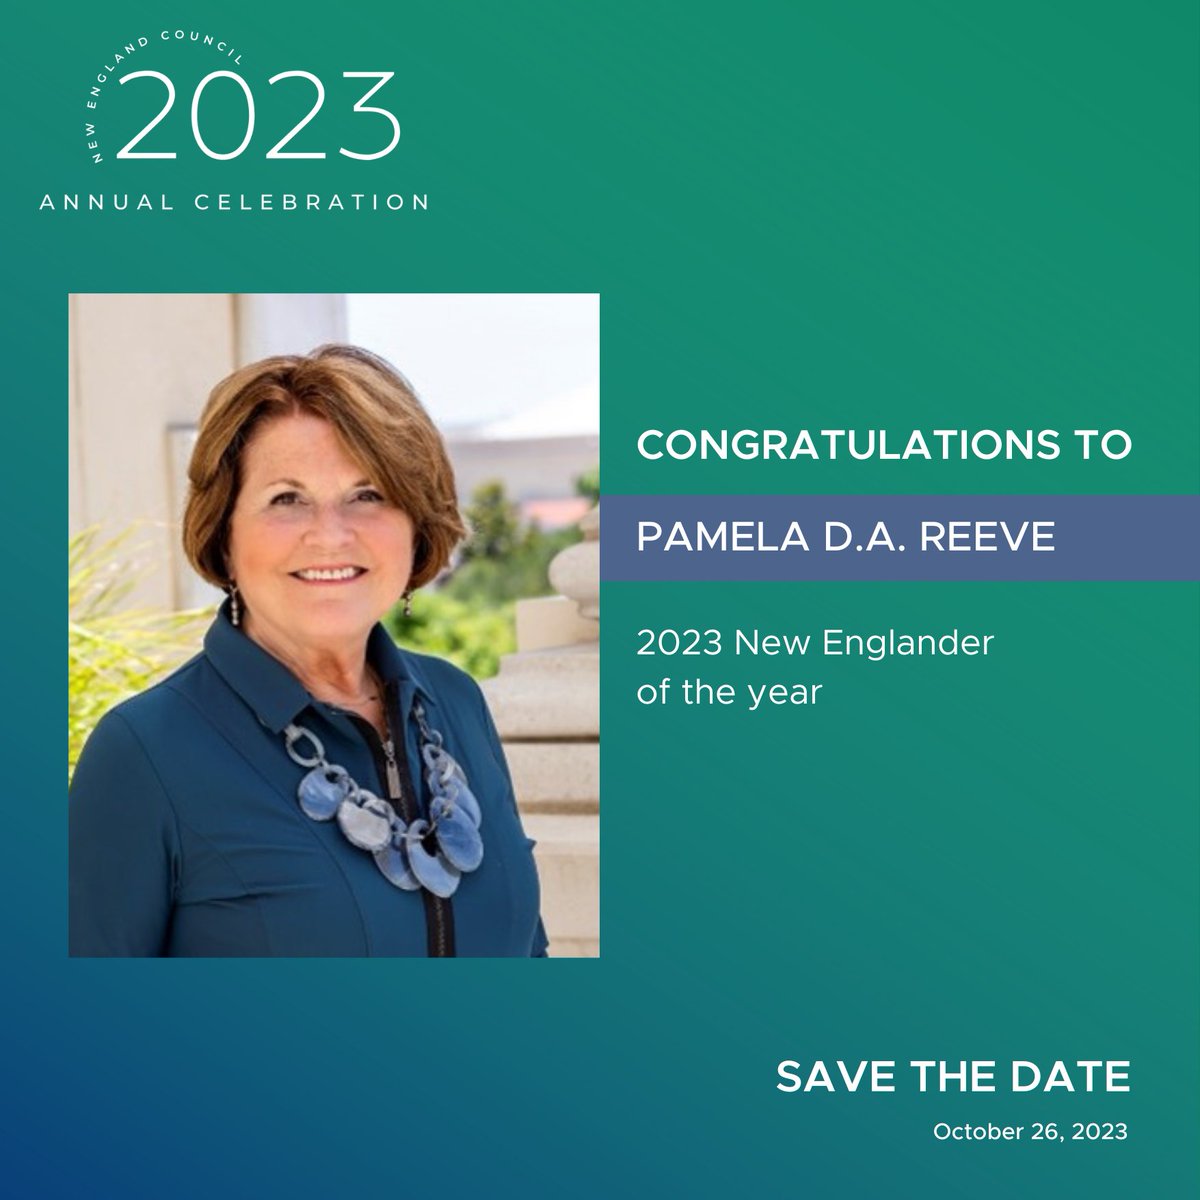 On Oct. 26, we will honor Pam Reeve at our 2023 Annual Celebration. 

Pam is Chair of the Board of @AmericanTowerUS, @Womens_Edge, @CareQuestInst, @MassGenBrigham Community Physicians, & @MassGeneralNews Physicians Organization. She is also the Former Board Chair @DentaQuest.